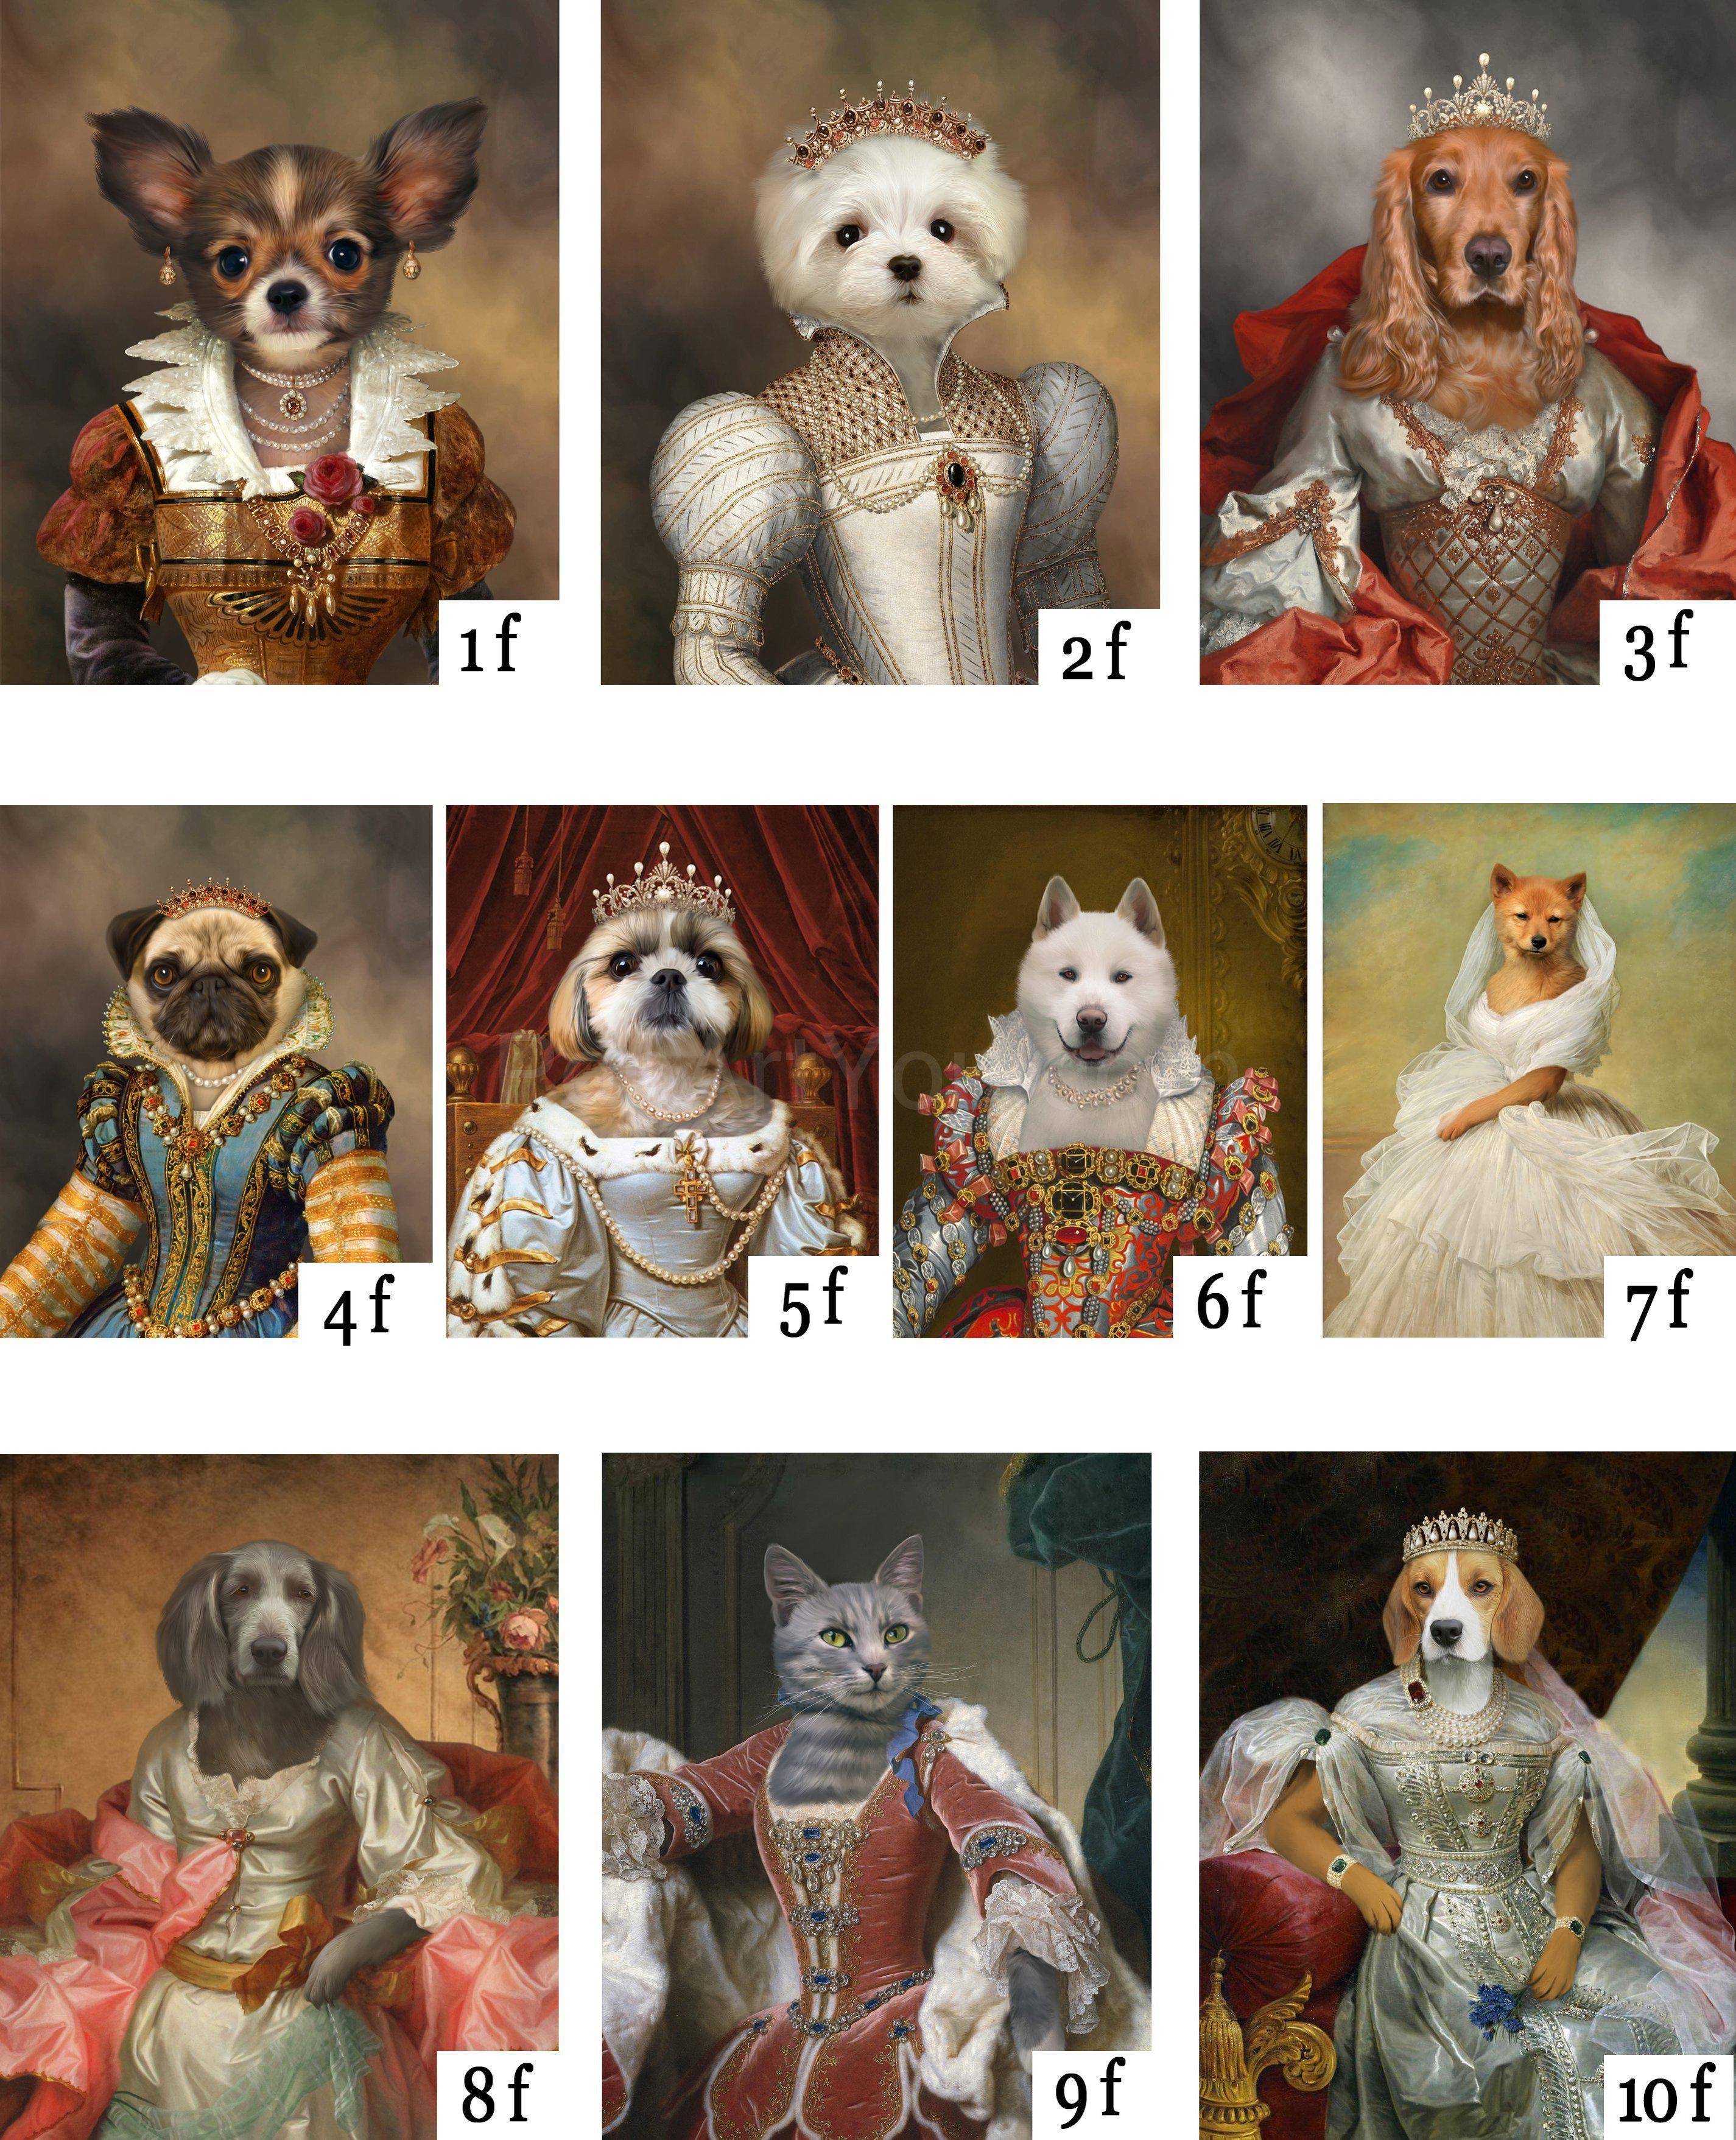 The third of many costume combinations for a multi pets portrait